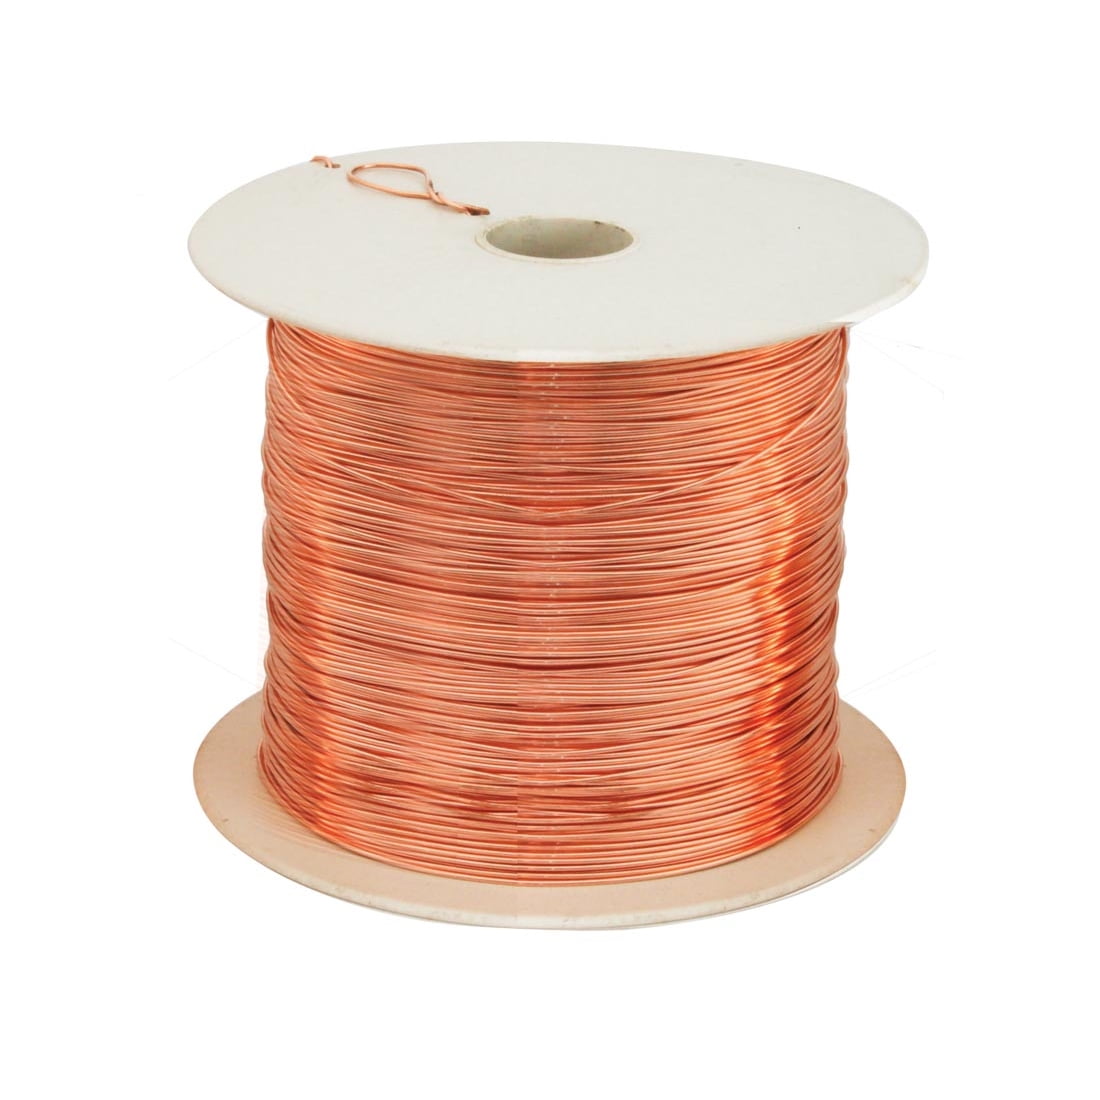 Copper Wire, Silver Plated Parawire 24ga Rose Gold 100' Roll